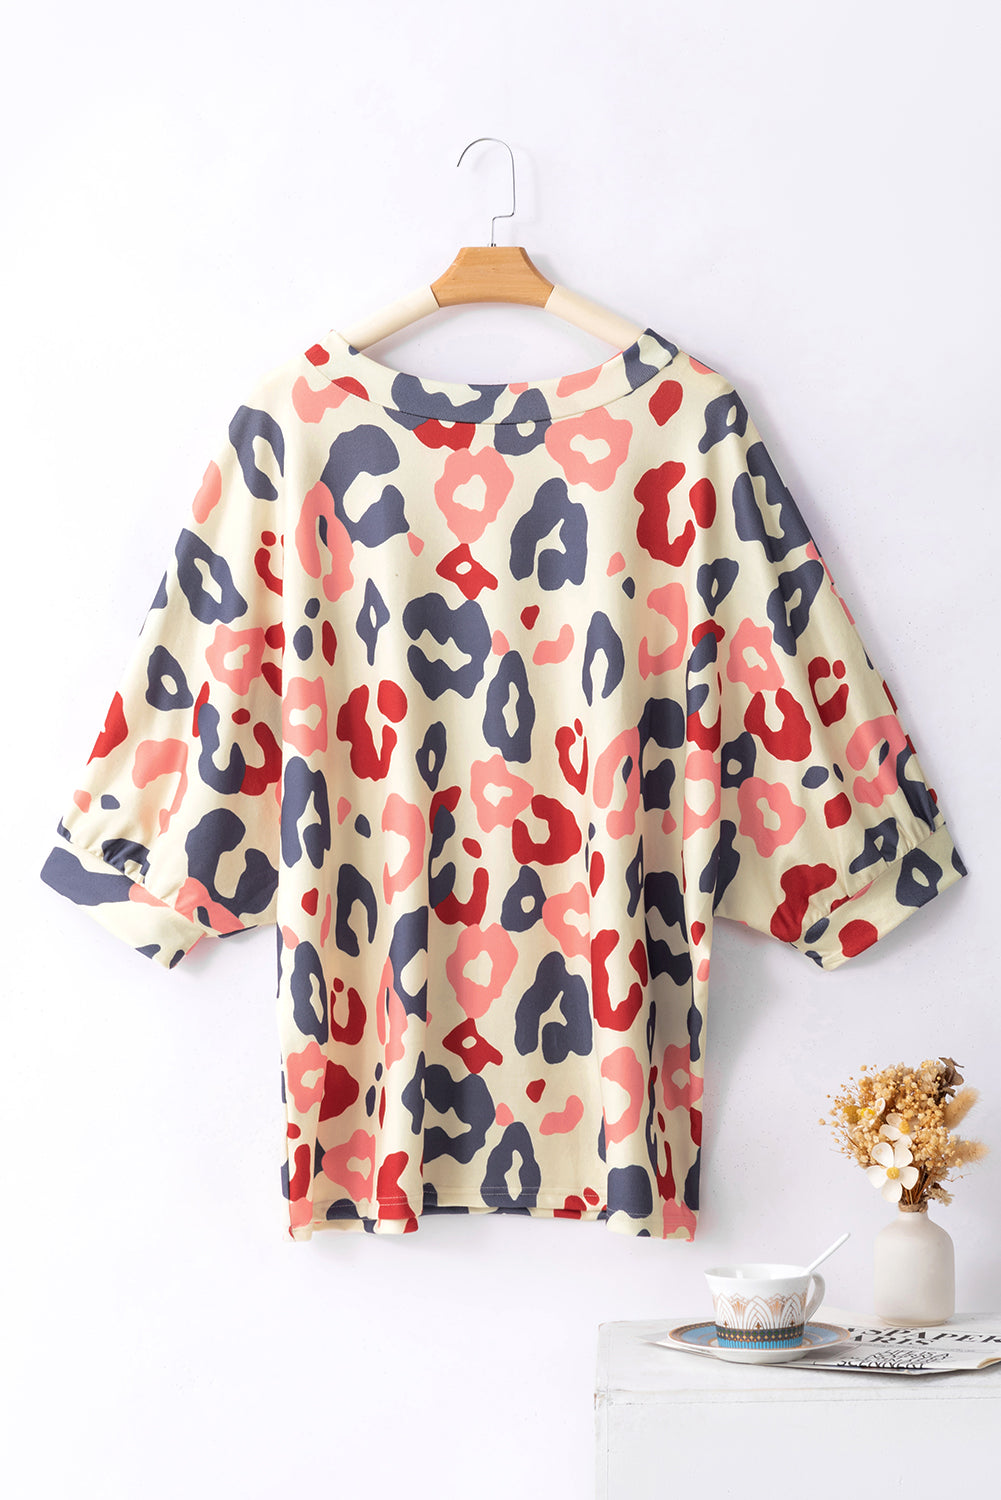 White Colorful Leopard Print Batwing Sleeve Plus Blouse